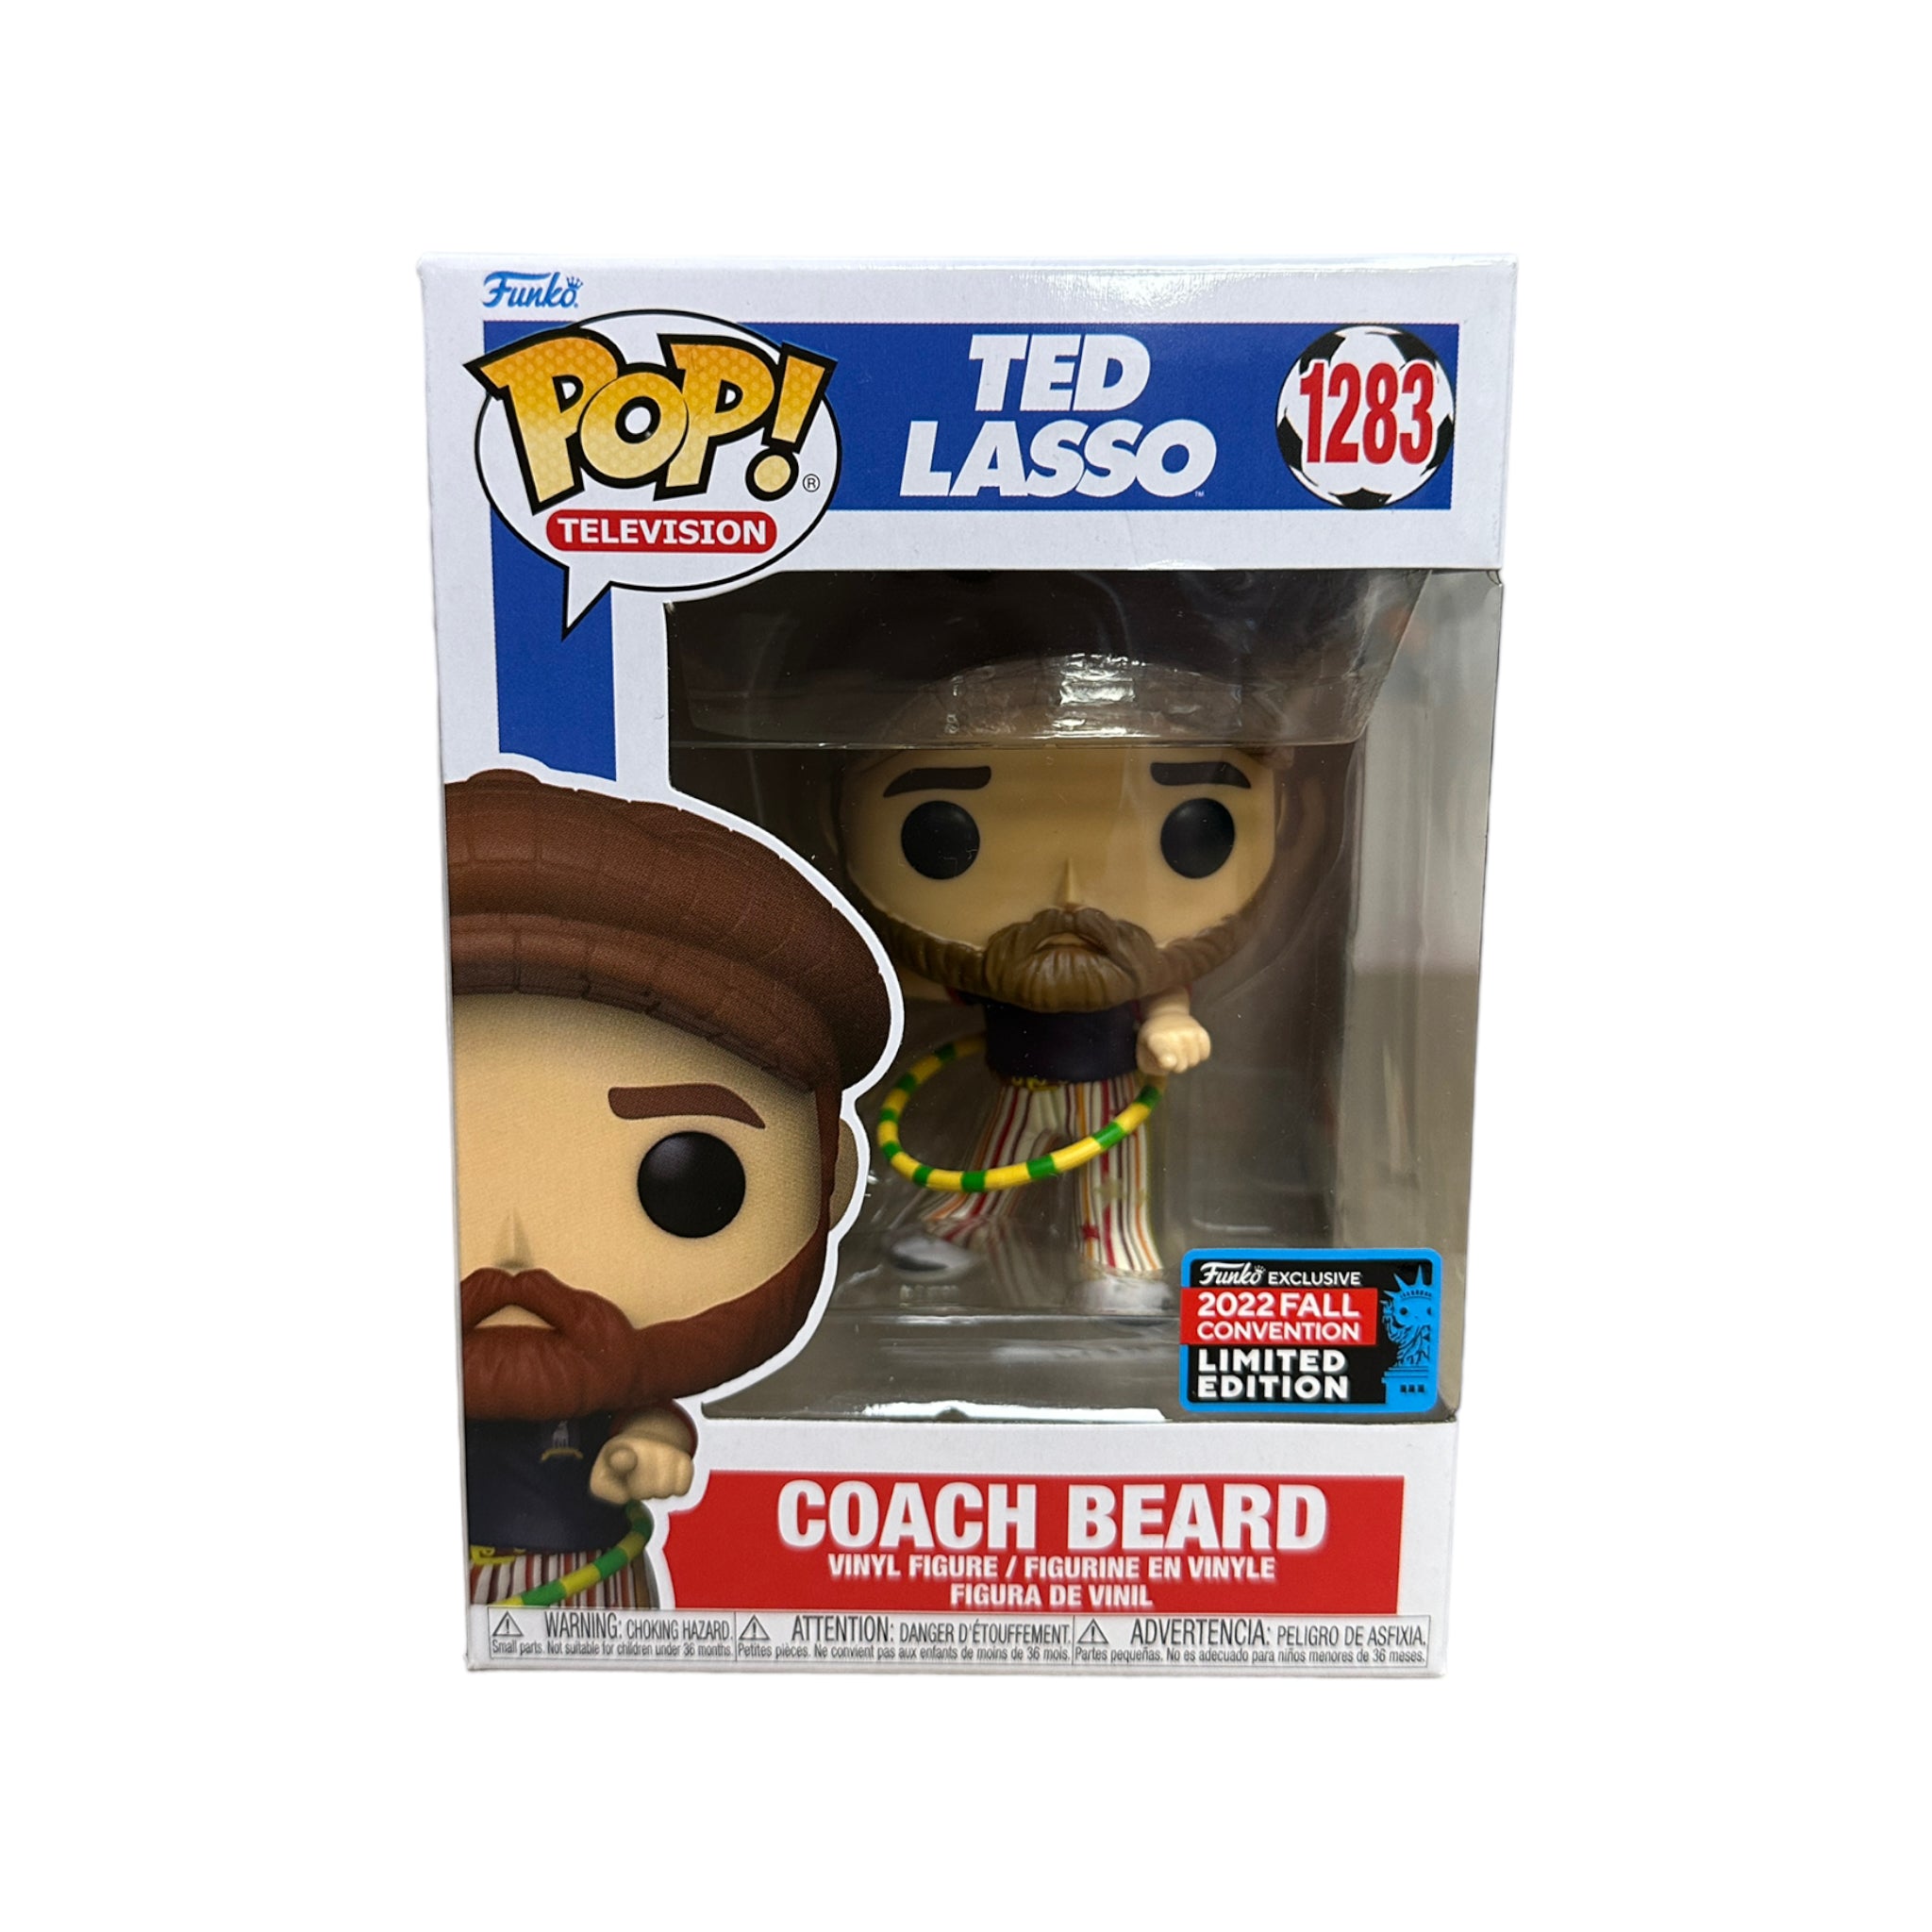 Coach Beard #1283 Funko Pop! - Ted Lasso - NYCC 2022 Shared Exclusive - Condition 8.75/10